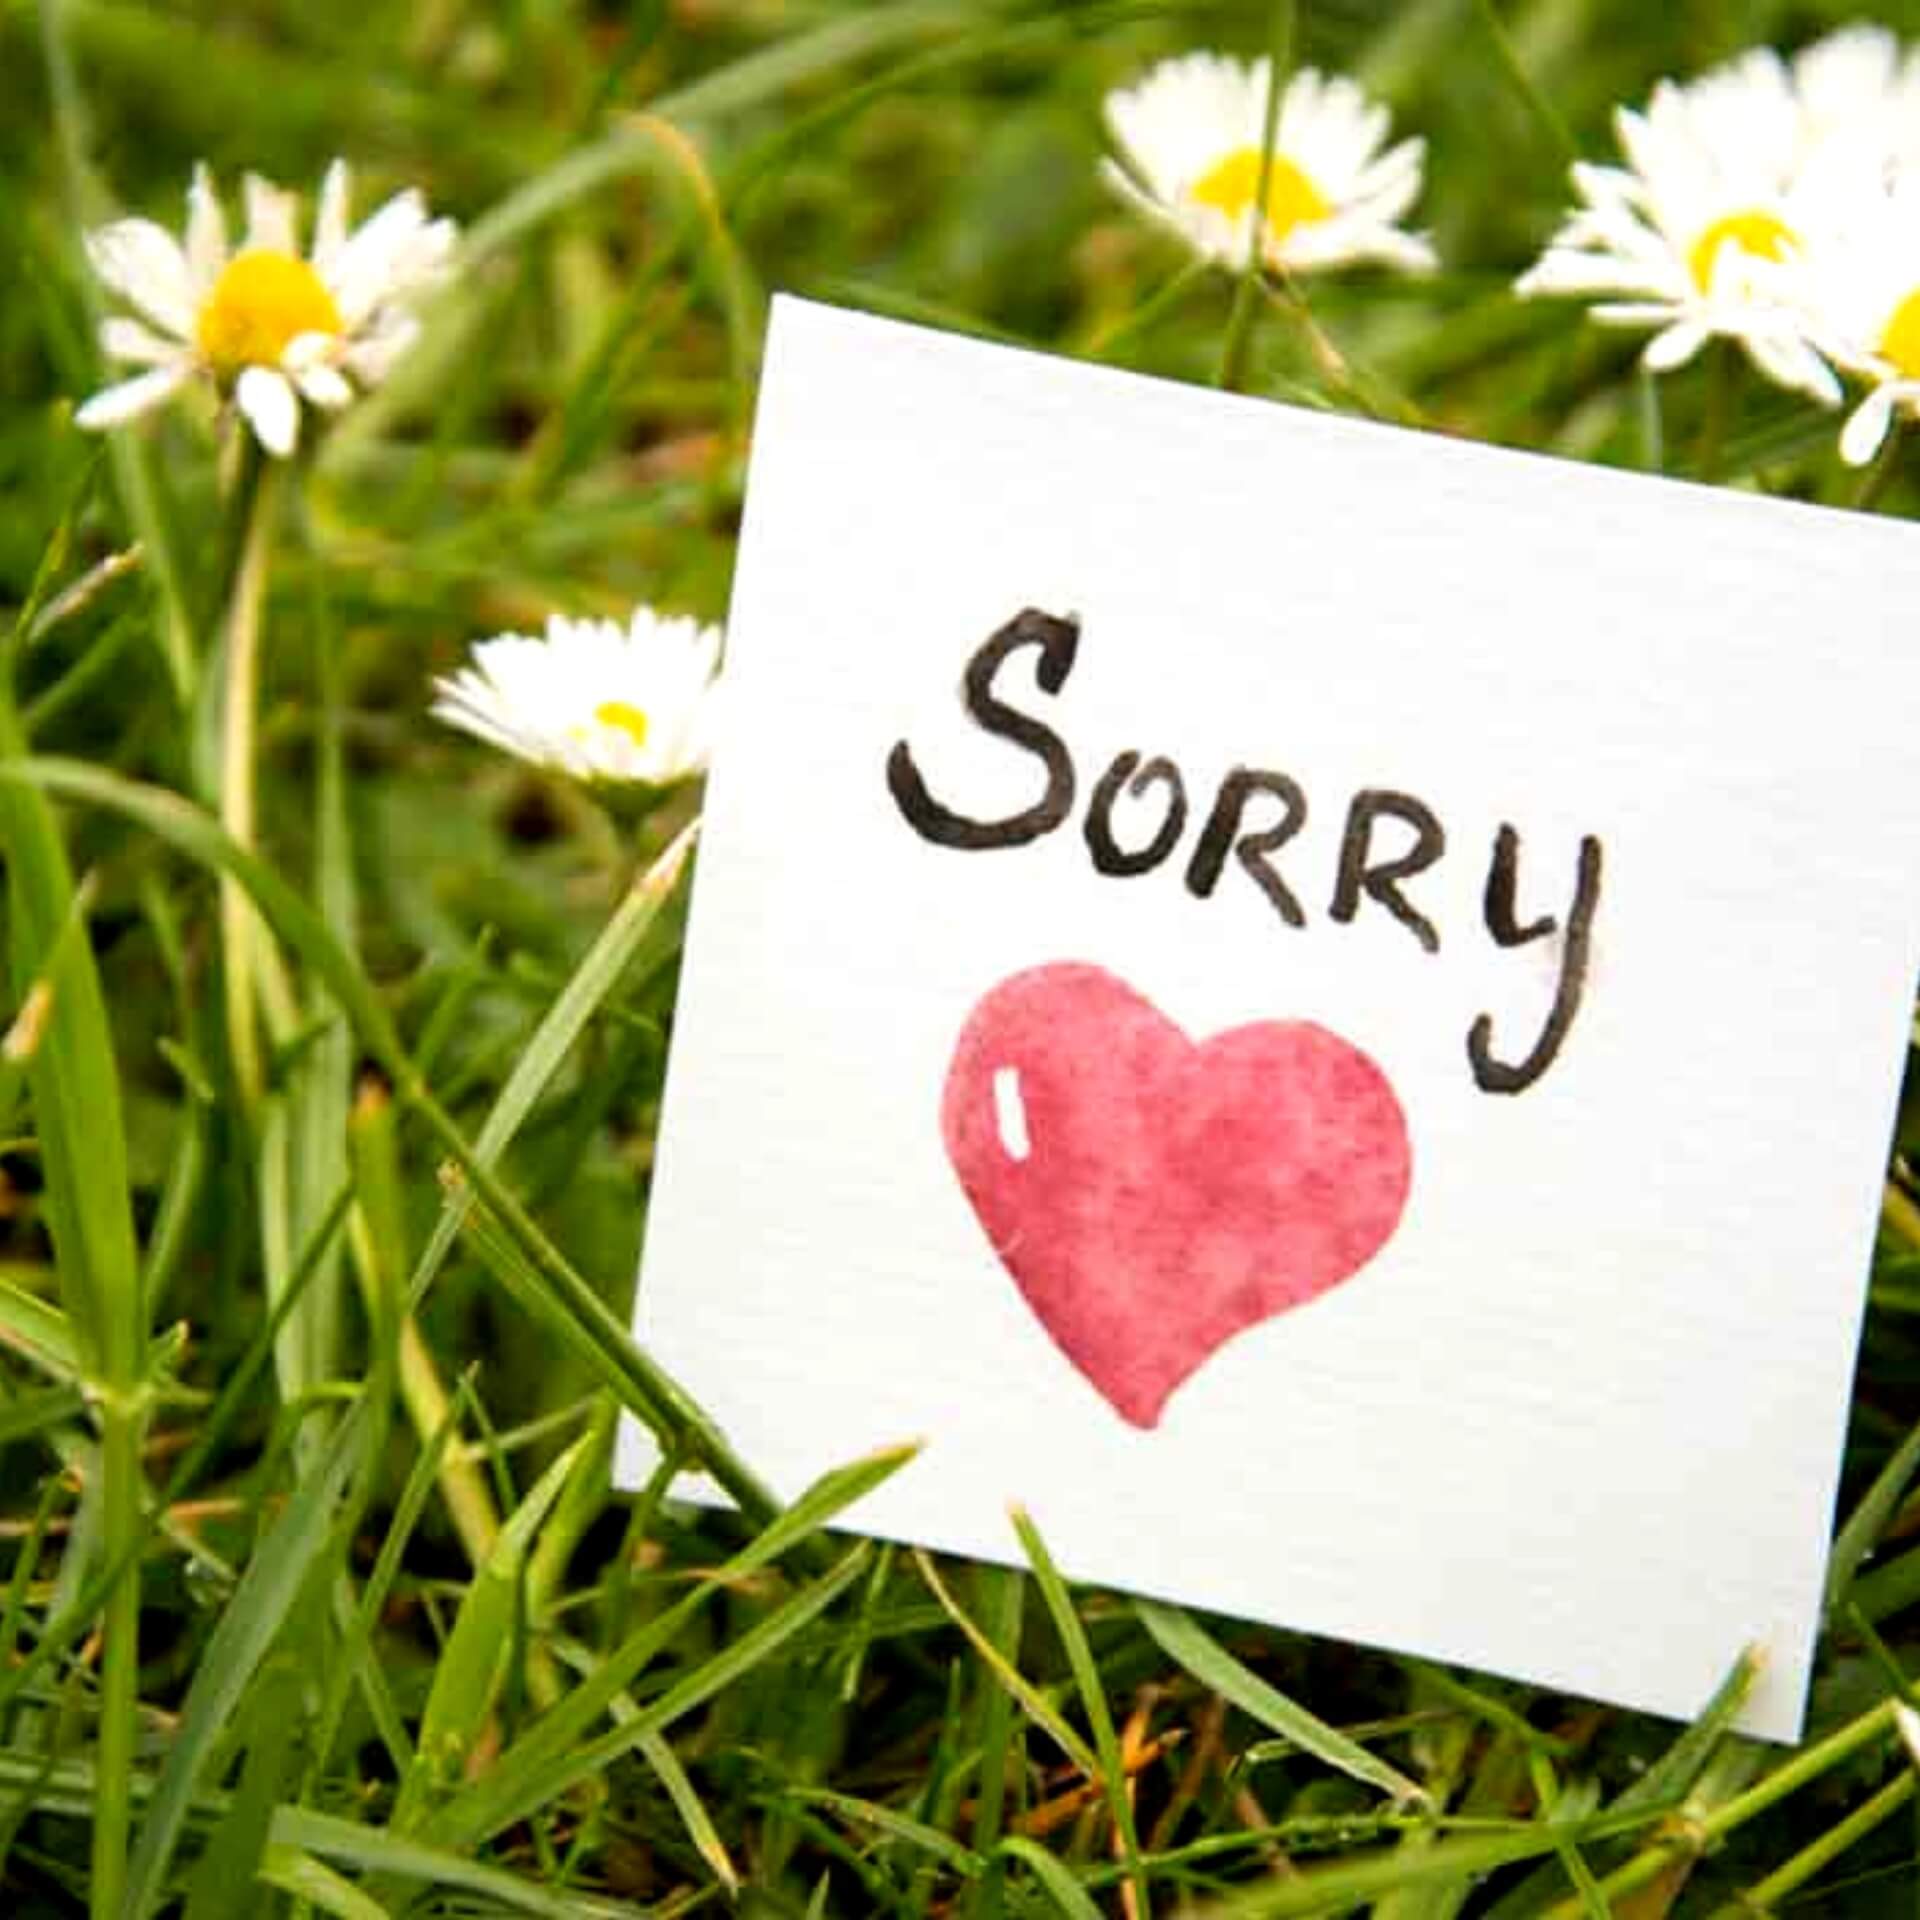 Sorry Pics images Free Download